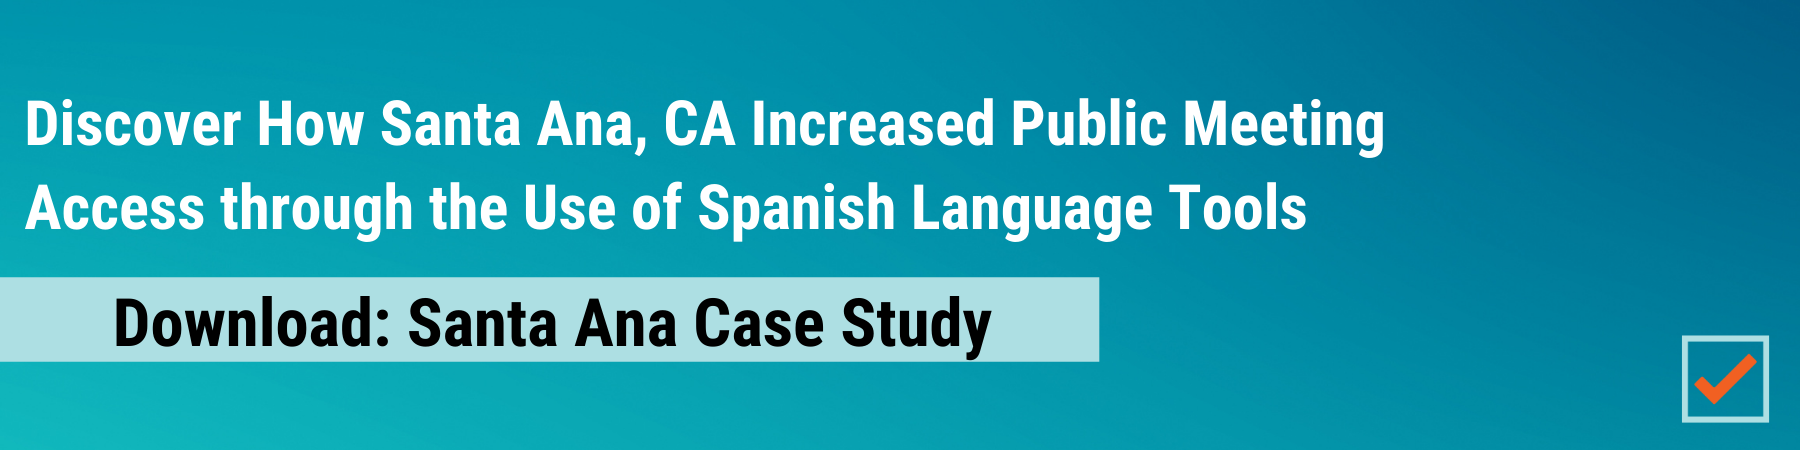 Case study: Discover how Santa Ana, CA increased public meeting access through the use of Spanish language tools.